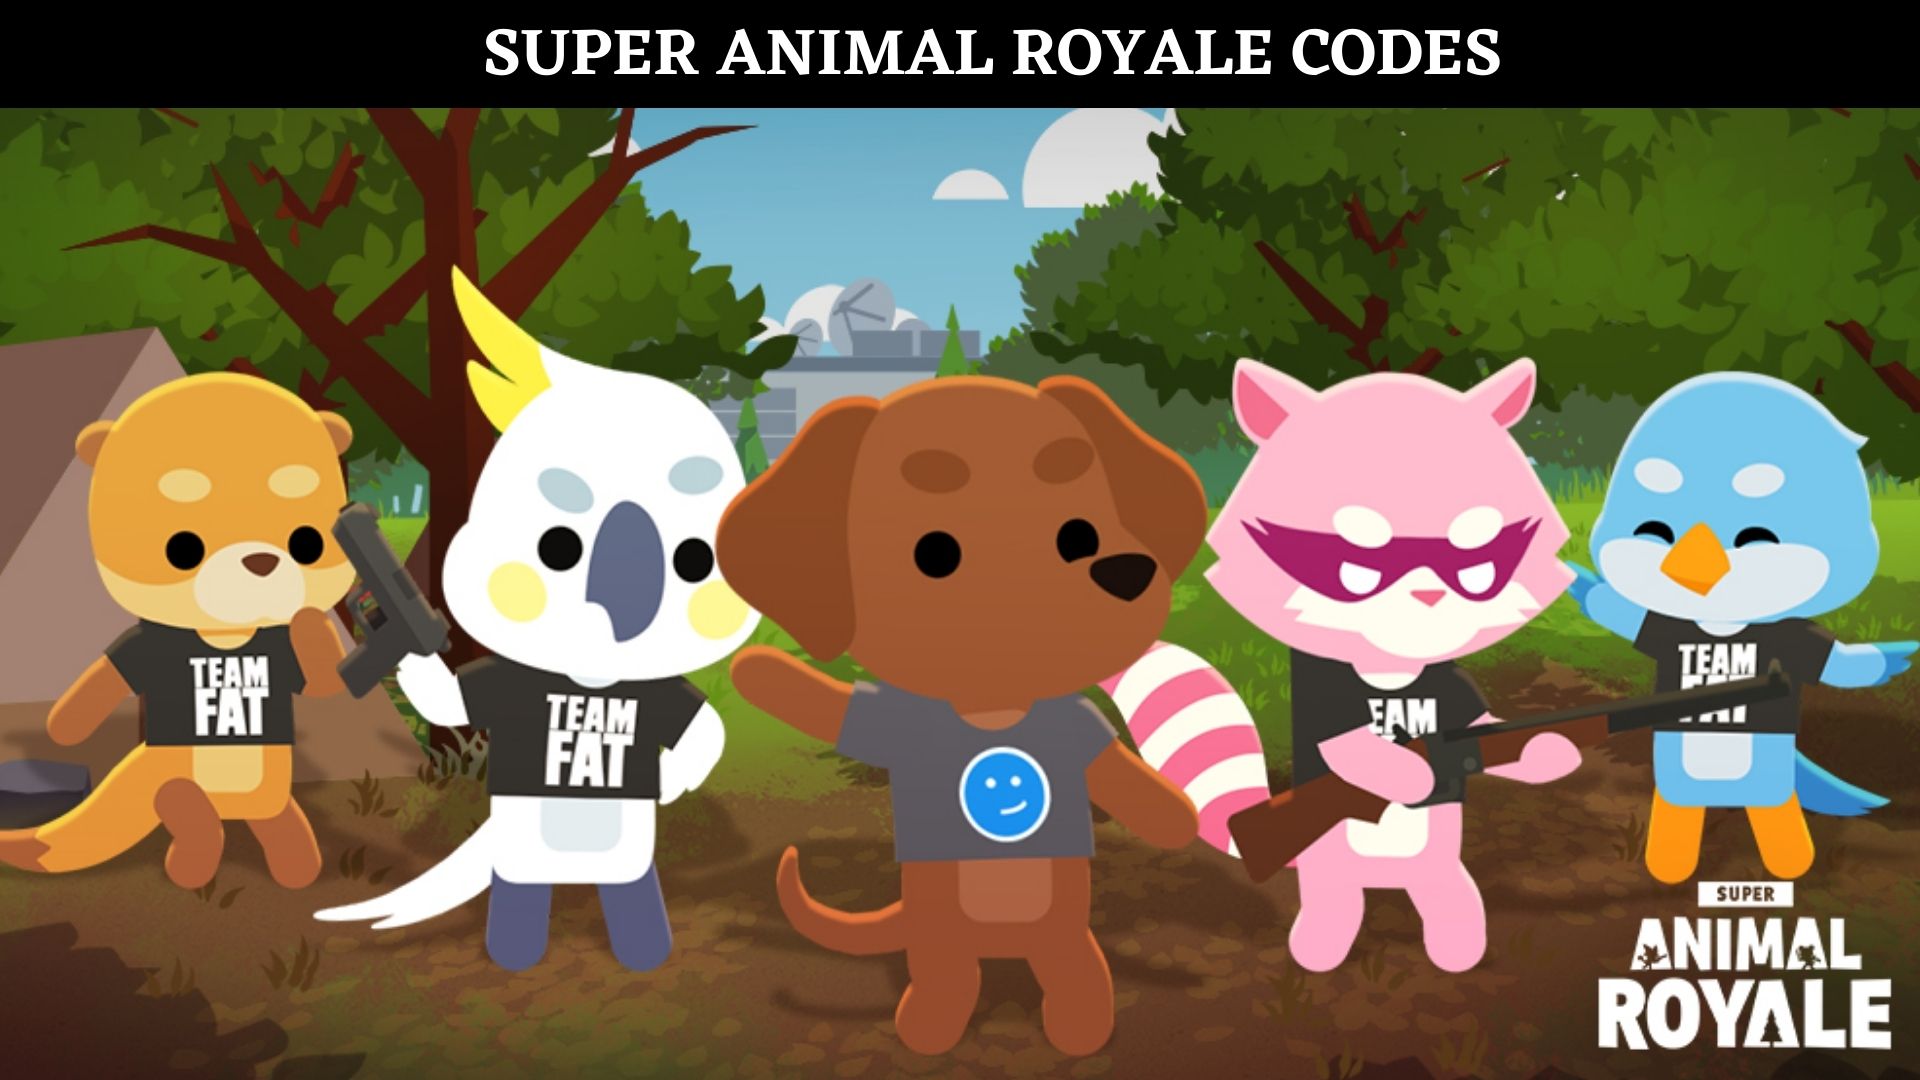 Super Animal Royale Codes, How To Redeem Super Animal Royale Codes 2021 September?